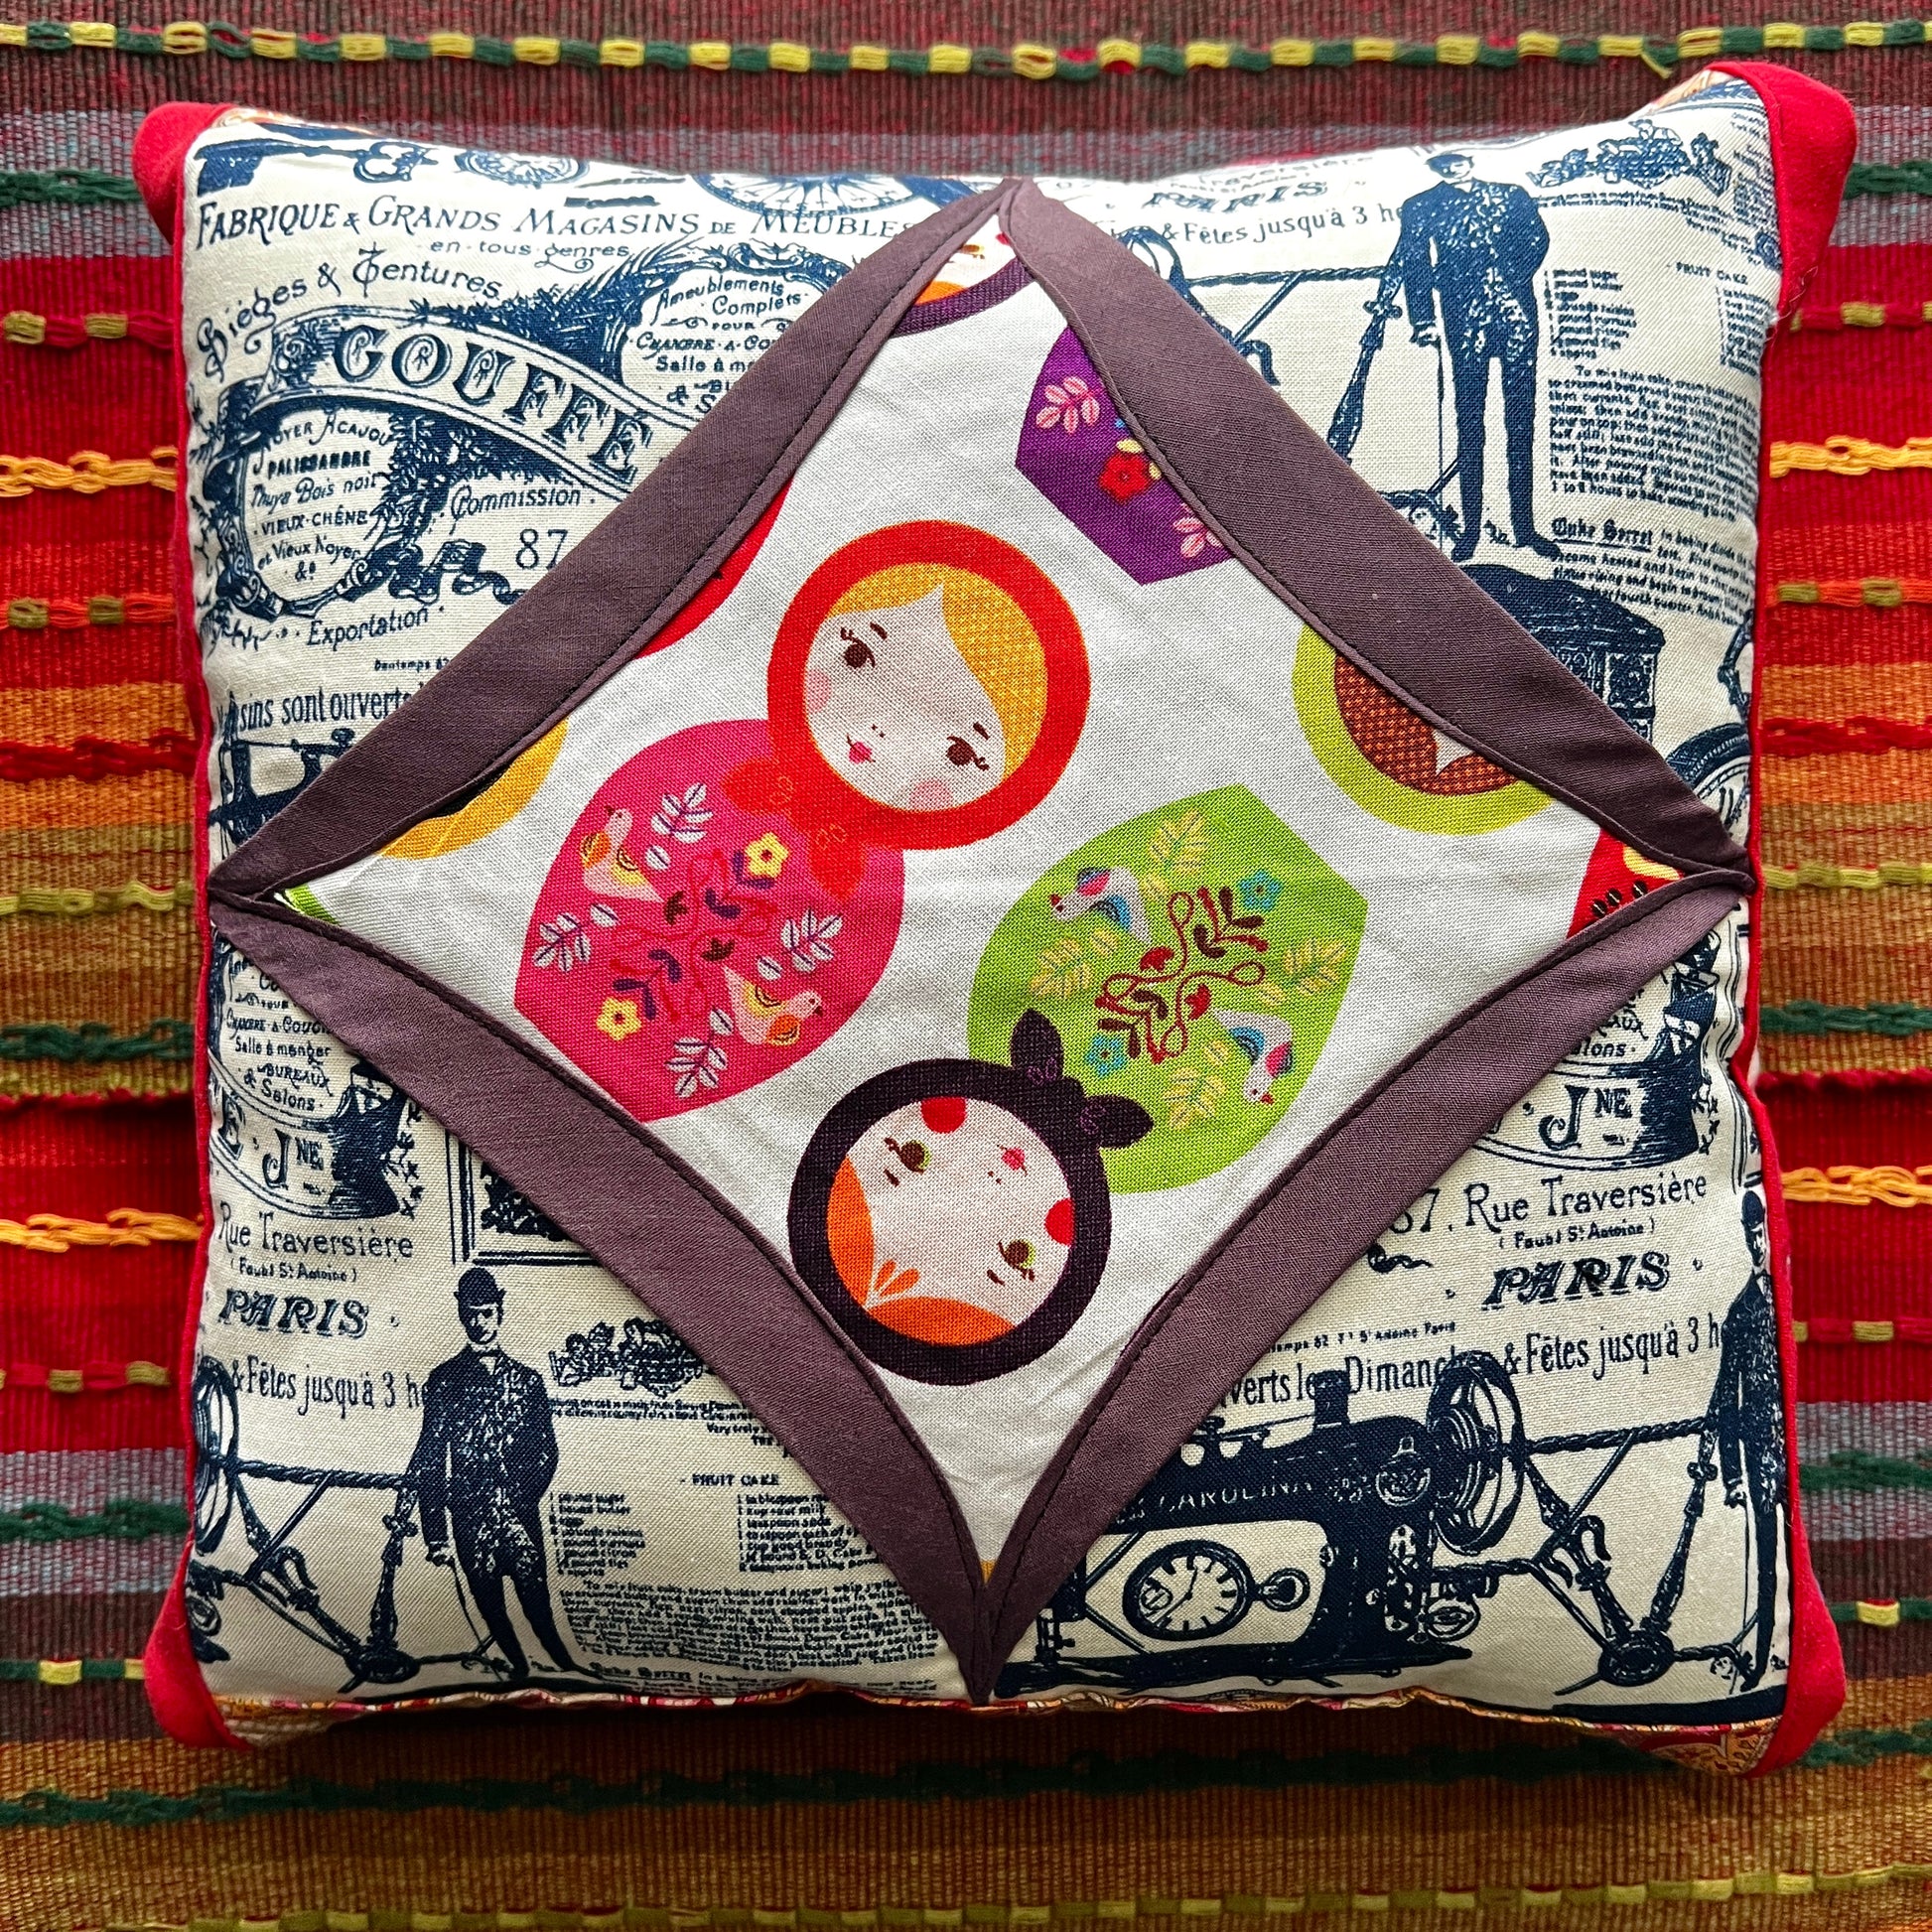 matryoshka little pillow, lay flat against a colorful background